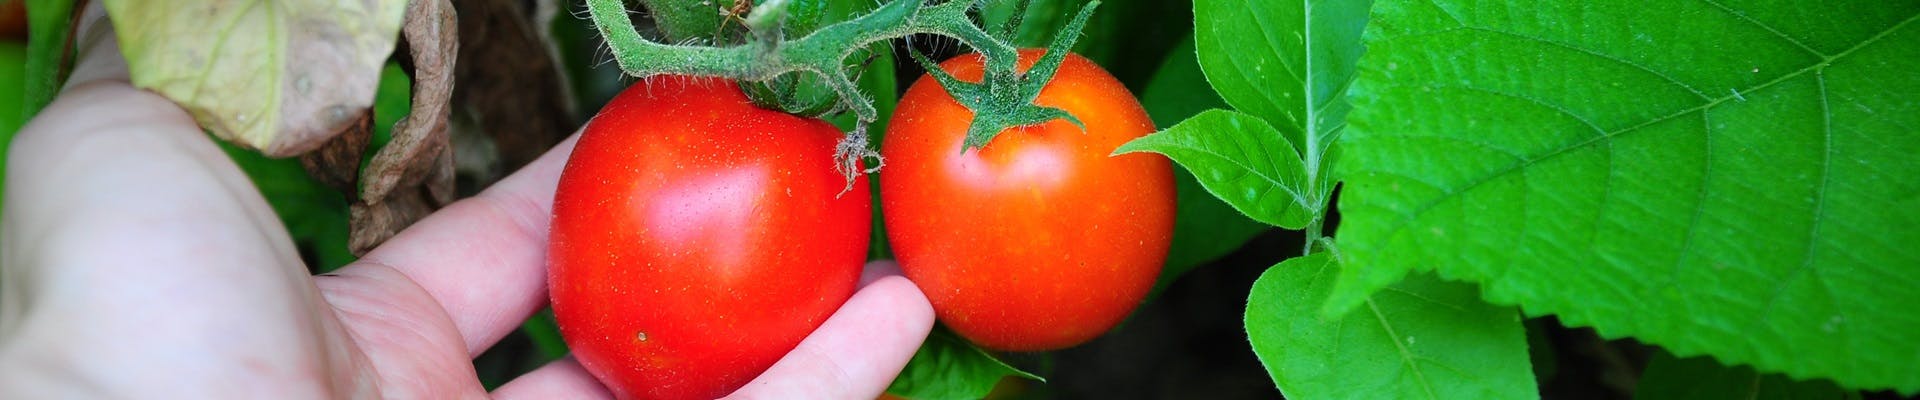 a hand holding a tomato